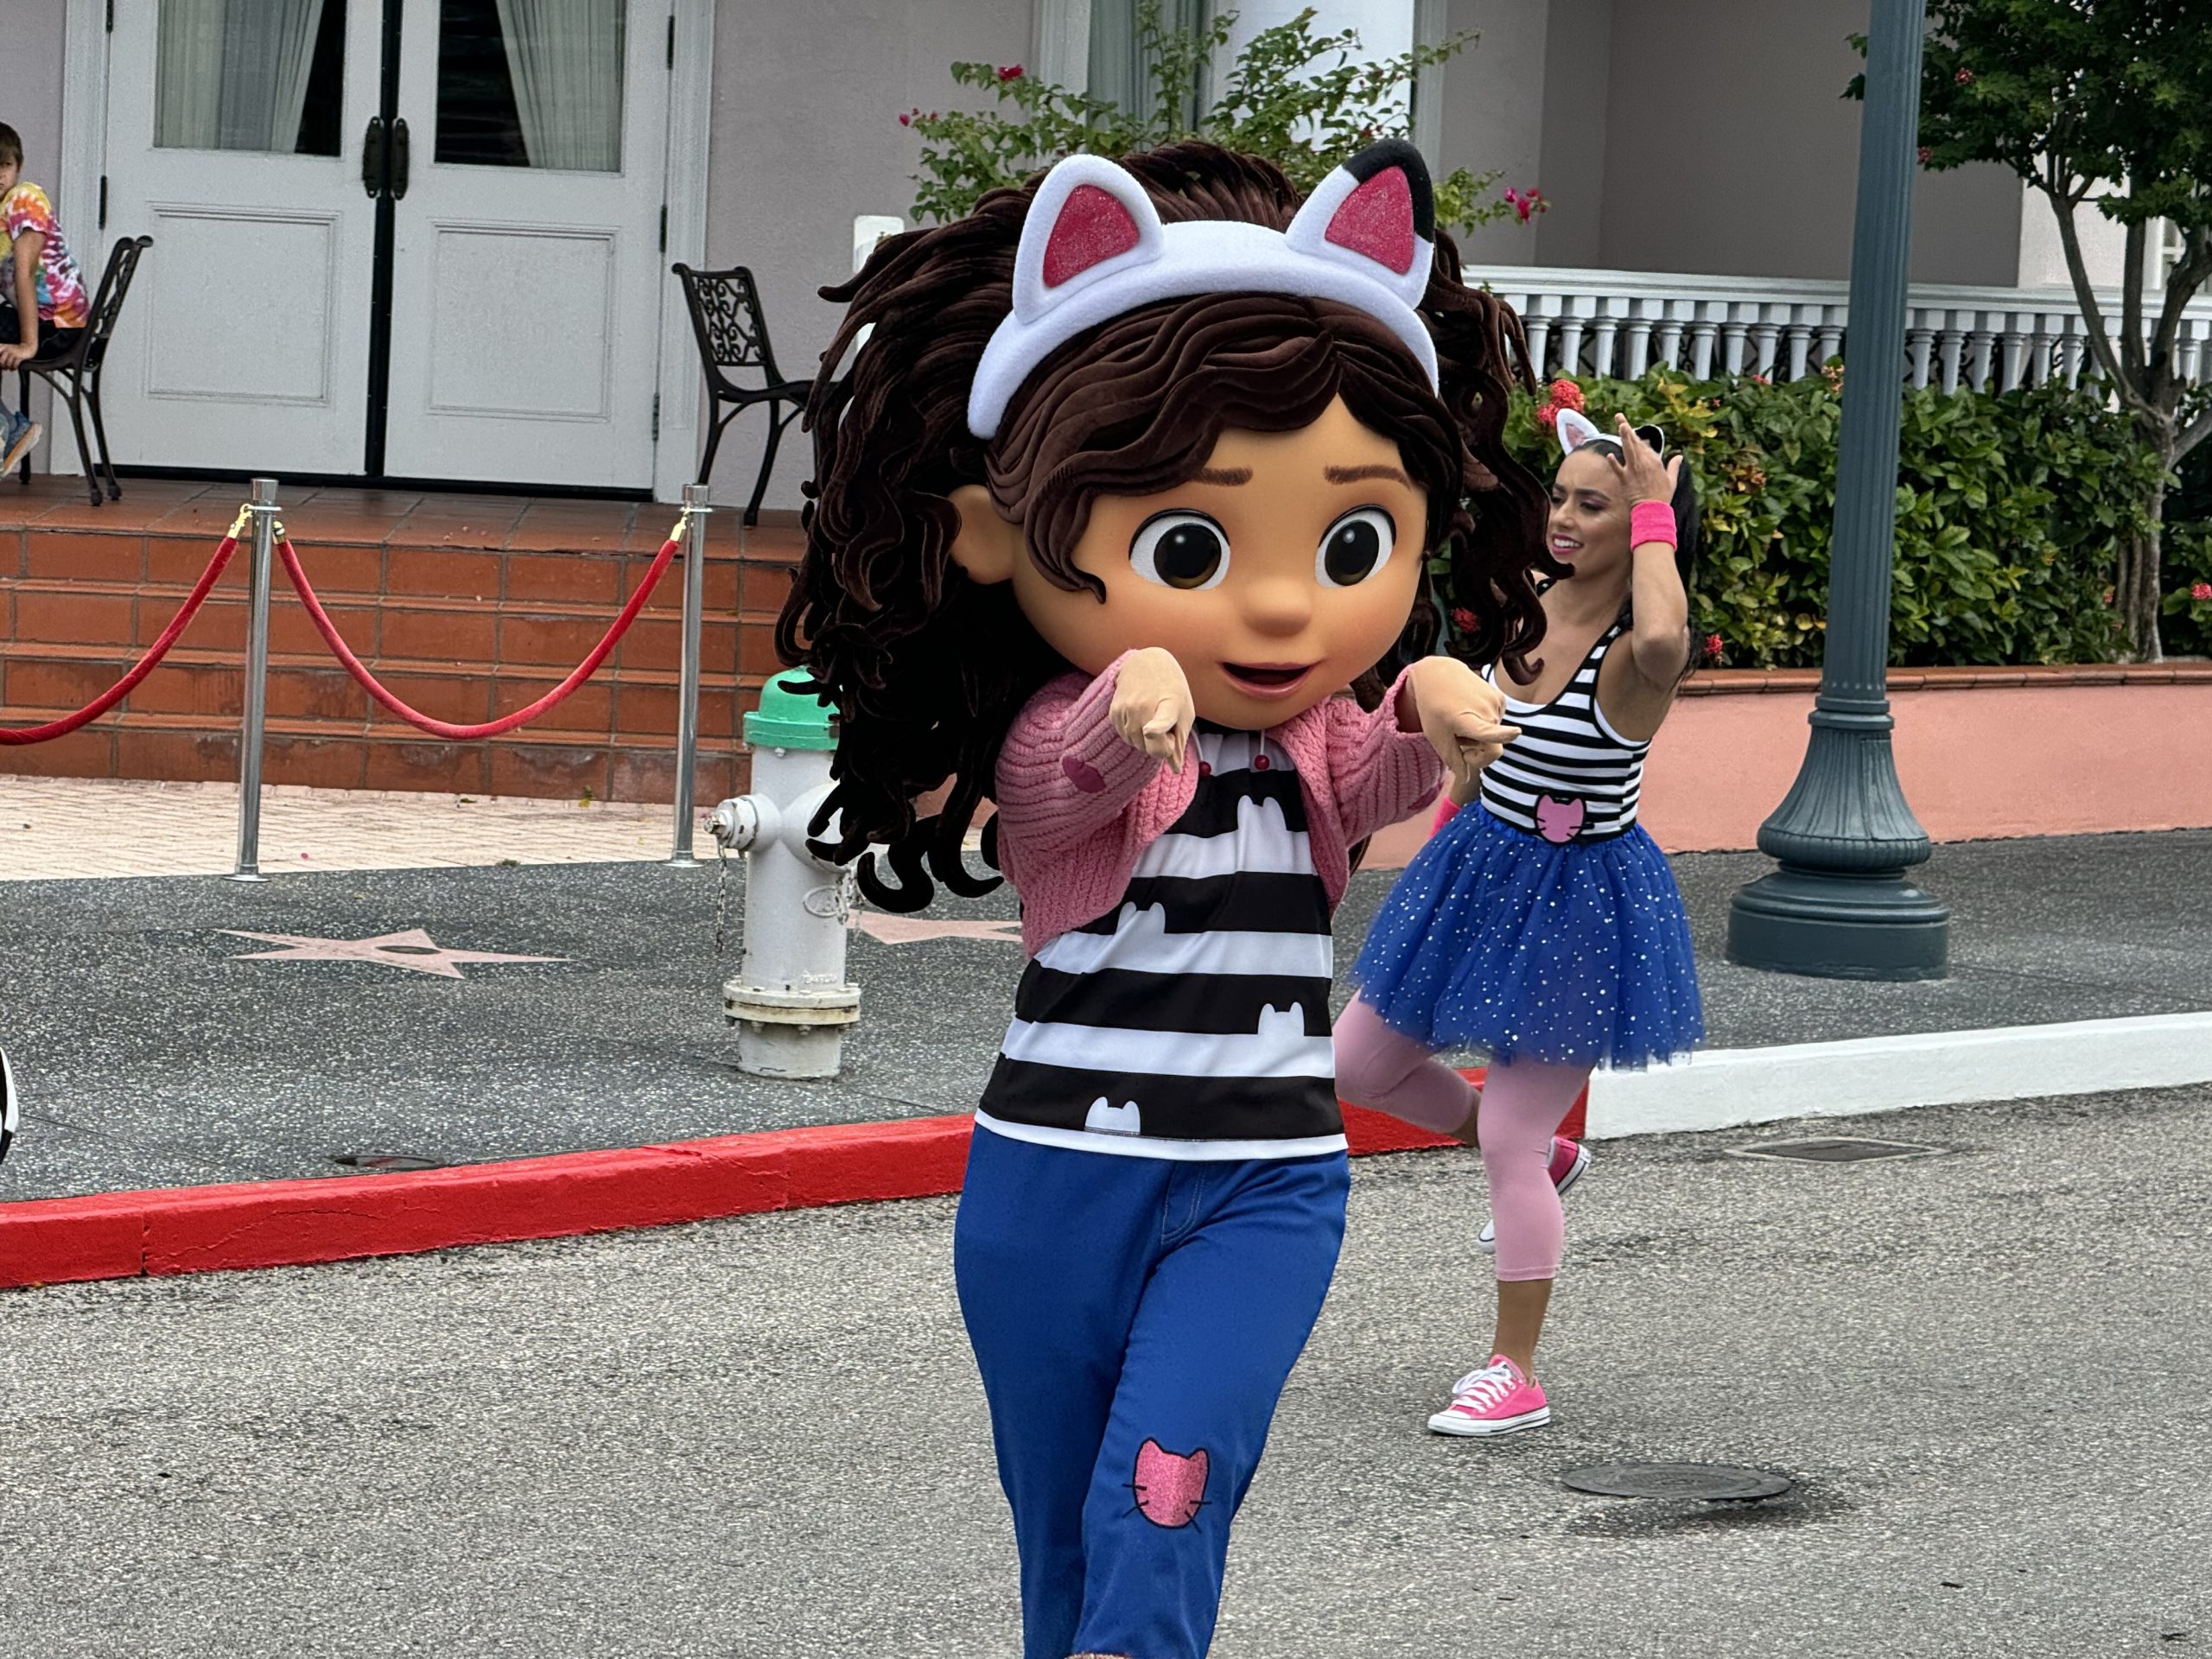 Gabby's Dollhouse Dance Party debuts at Universal Studios Florida